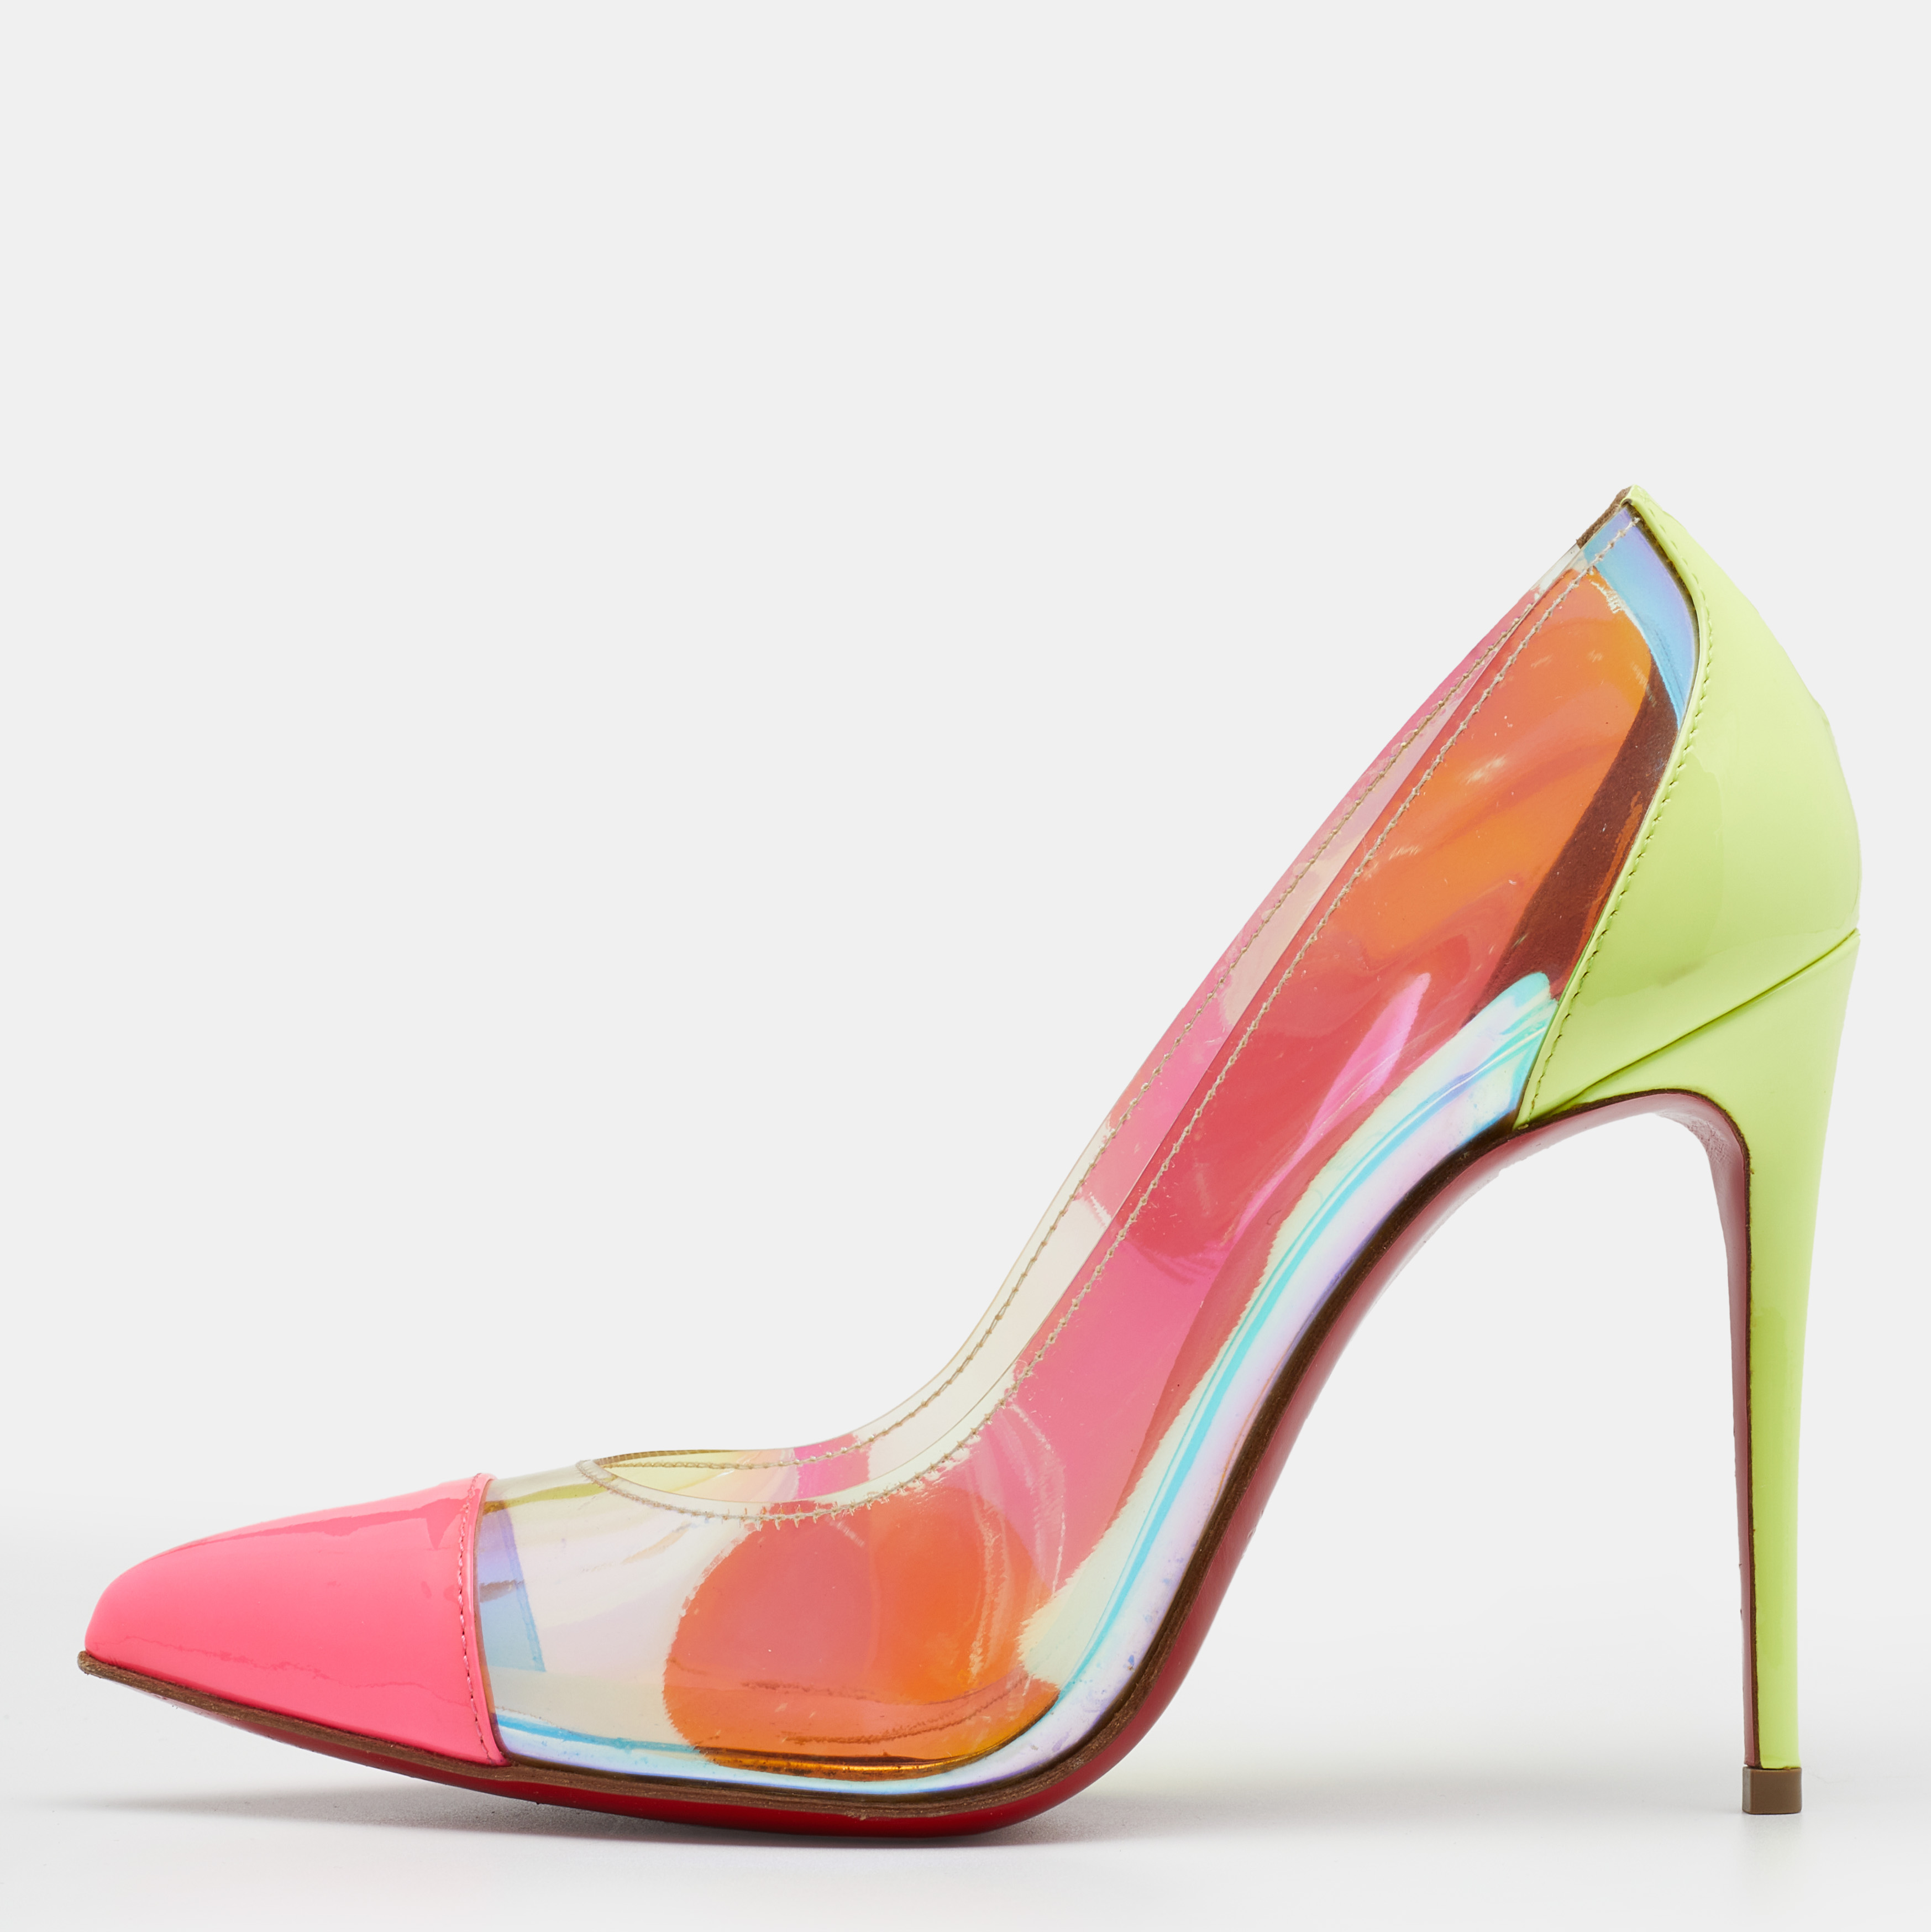 Take every step with elegance and style in these pumps from the House of Christian Louboutin. They are crafted meticulously using multicolored PVC and patent leather. They showcase pointed toes a slip on style and slim heels. These beautiful CL pumps will be your favorite pair in no time